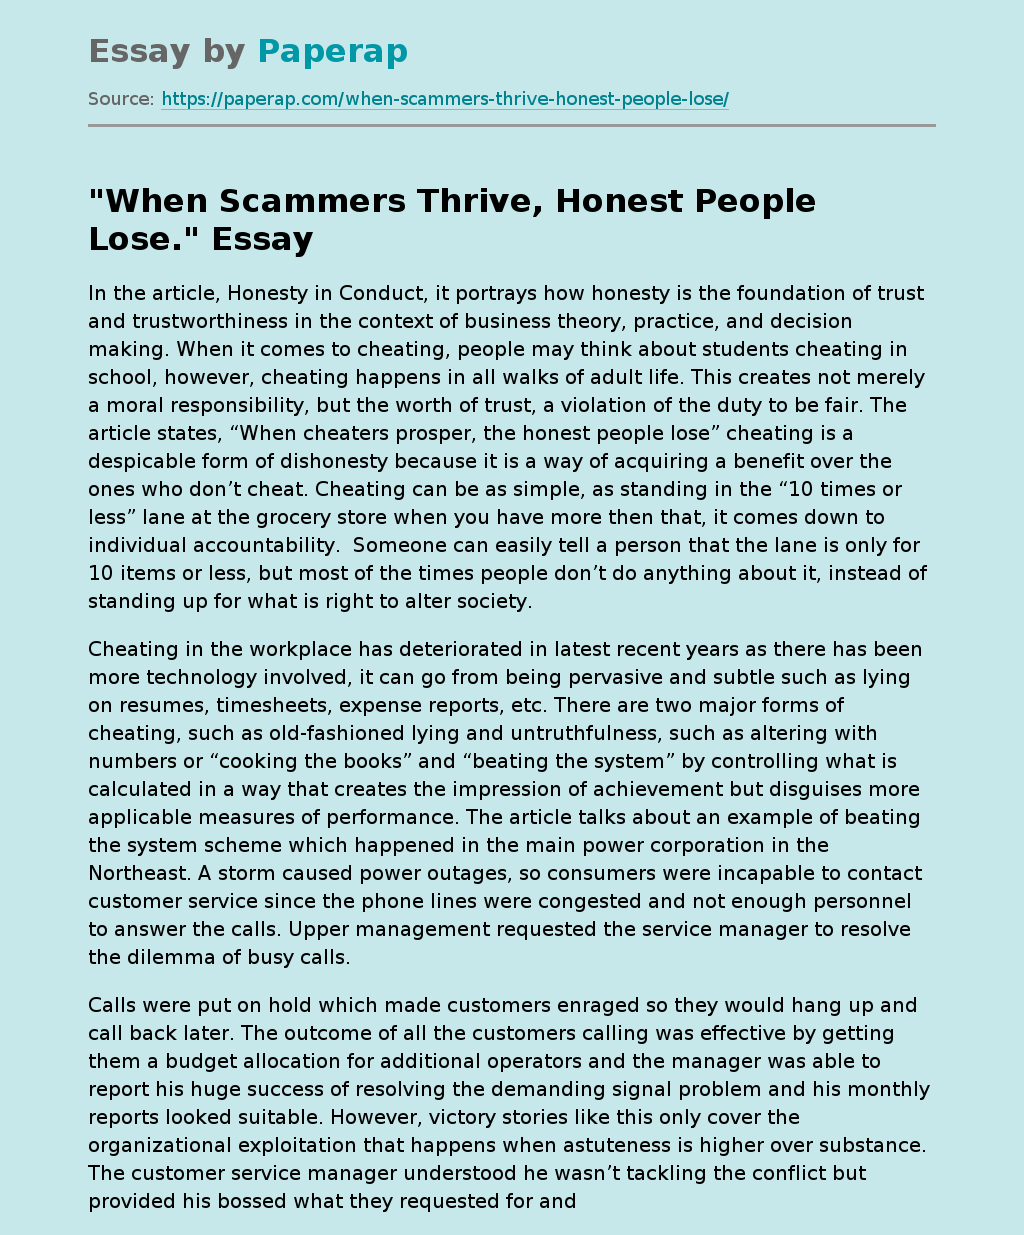 "When Scammers Thrive, Honest People Lose."